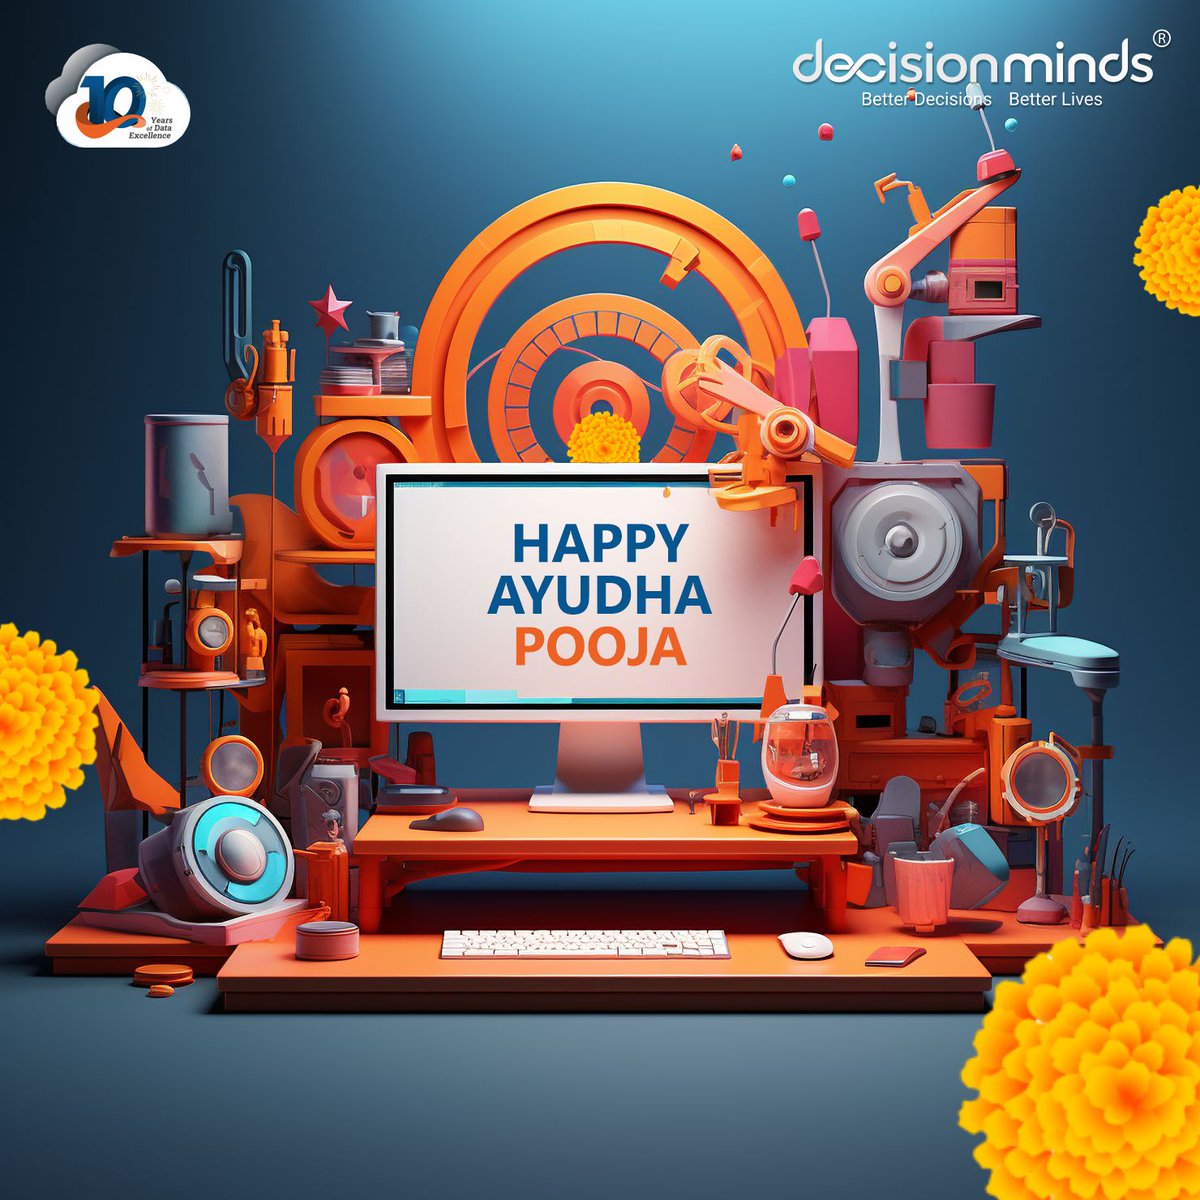 🌟 On this auspicious #AyudhaPooja, Decision Minds wishes you abundant blessings and prosperity. May your tools of trade and intellect be forever empowered for success. 🛠️✨ #FestiveWishes #CelebrateTradition #ProsperityAhead